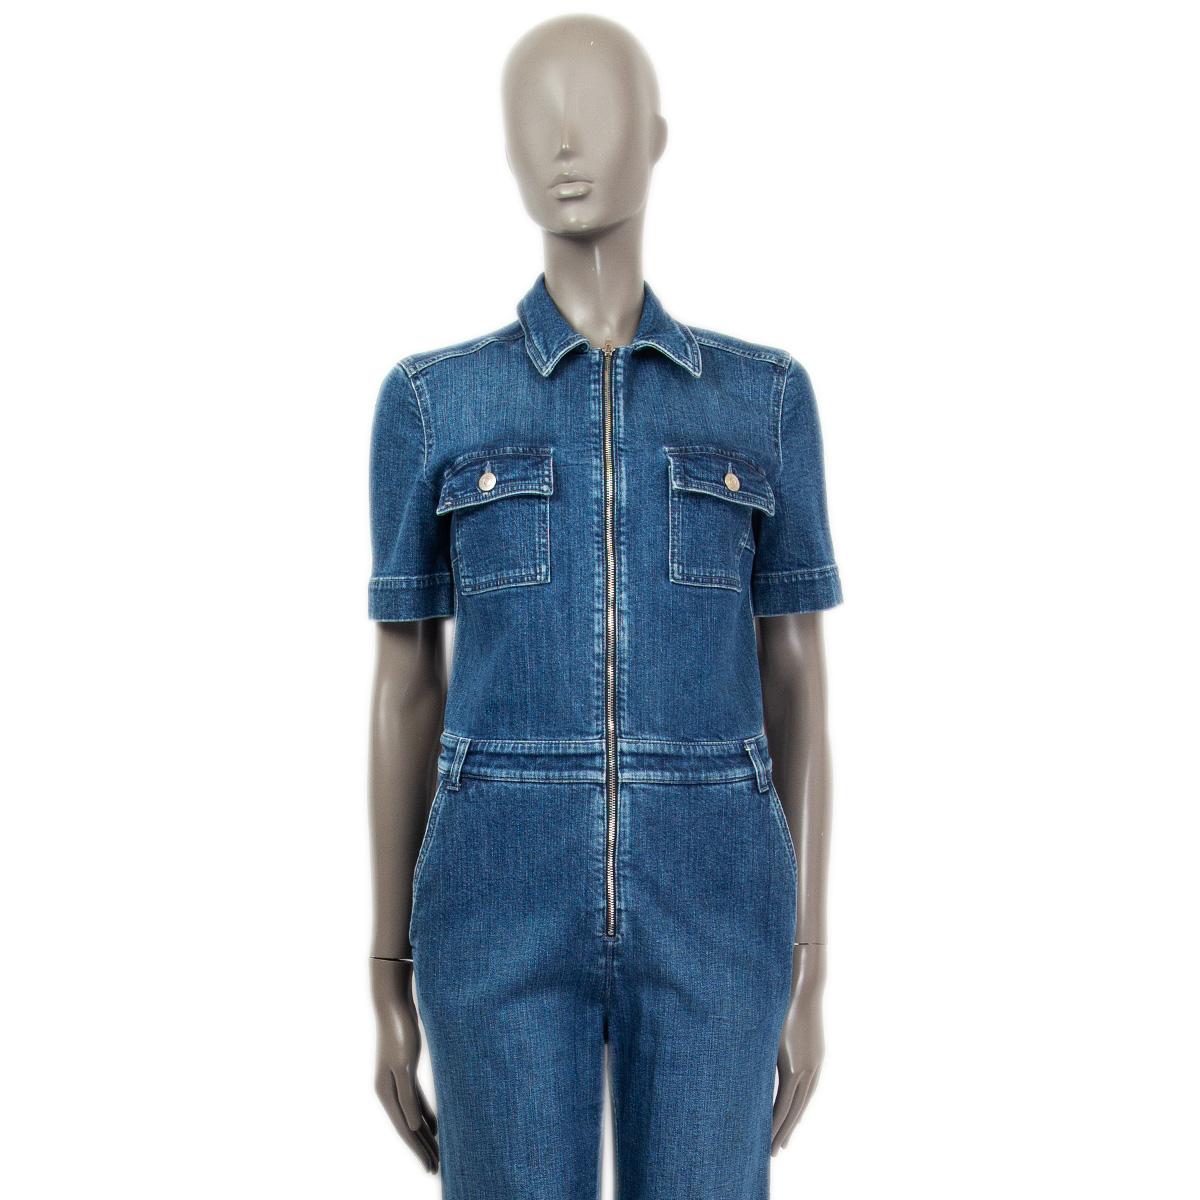 100% authentic Stella McCartney short sleeve denim jumpsuit in blue wash cotton (with 2% elastane - please note content tag is missing) with a flat collar and four front pockets. Comes with belt loops and closes with a zipper on the front. Unlined.